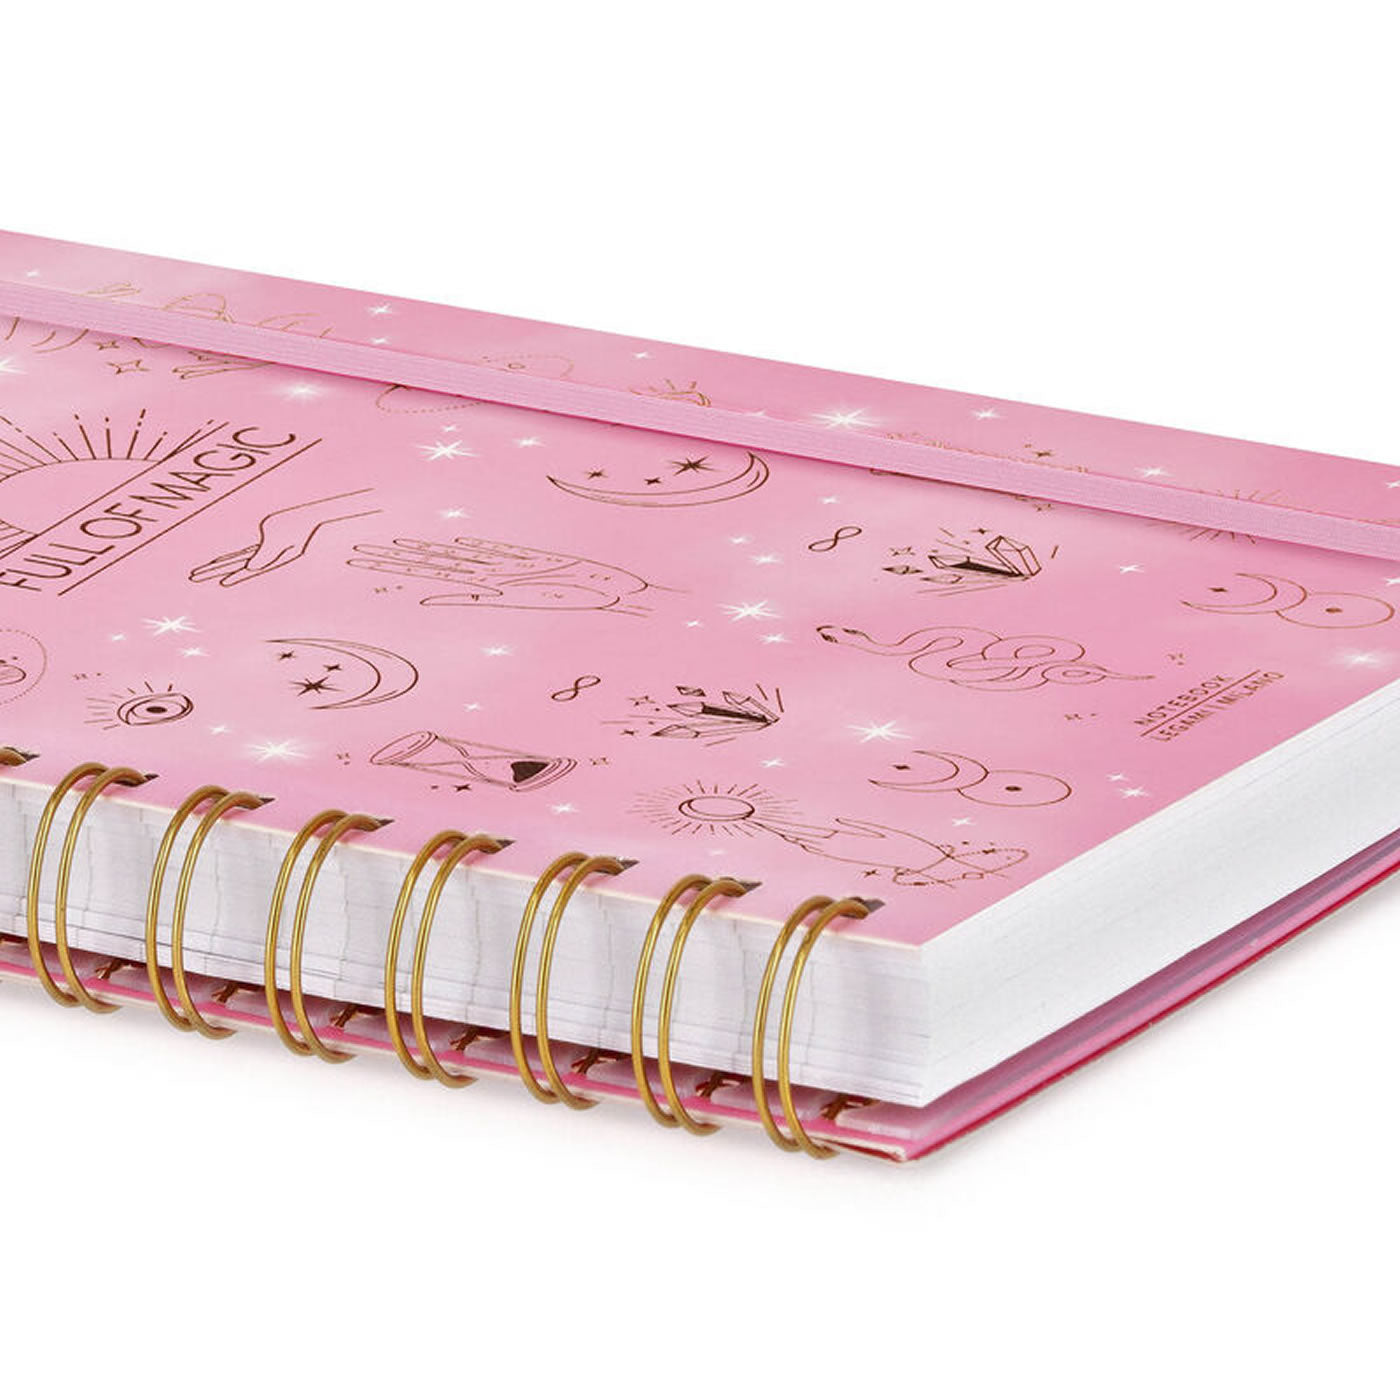 Legami Magic Large Spiral Notebook - Lined